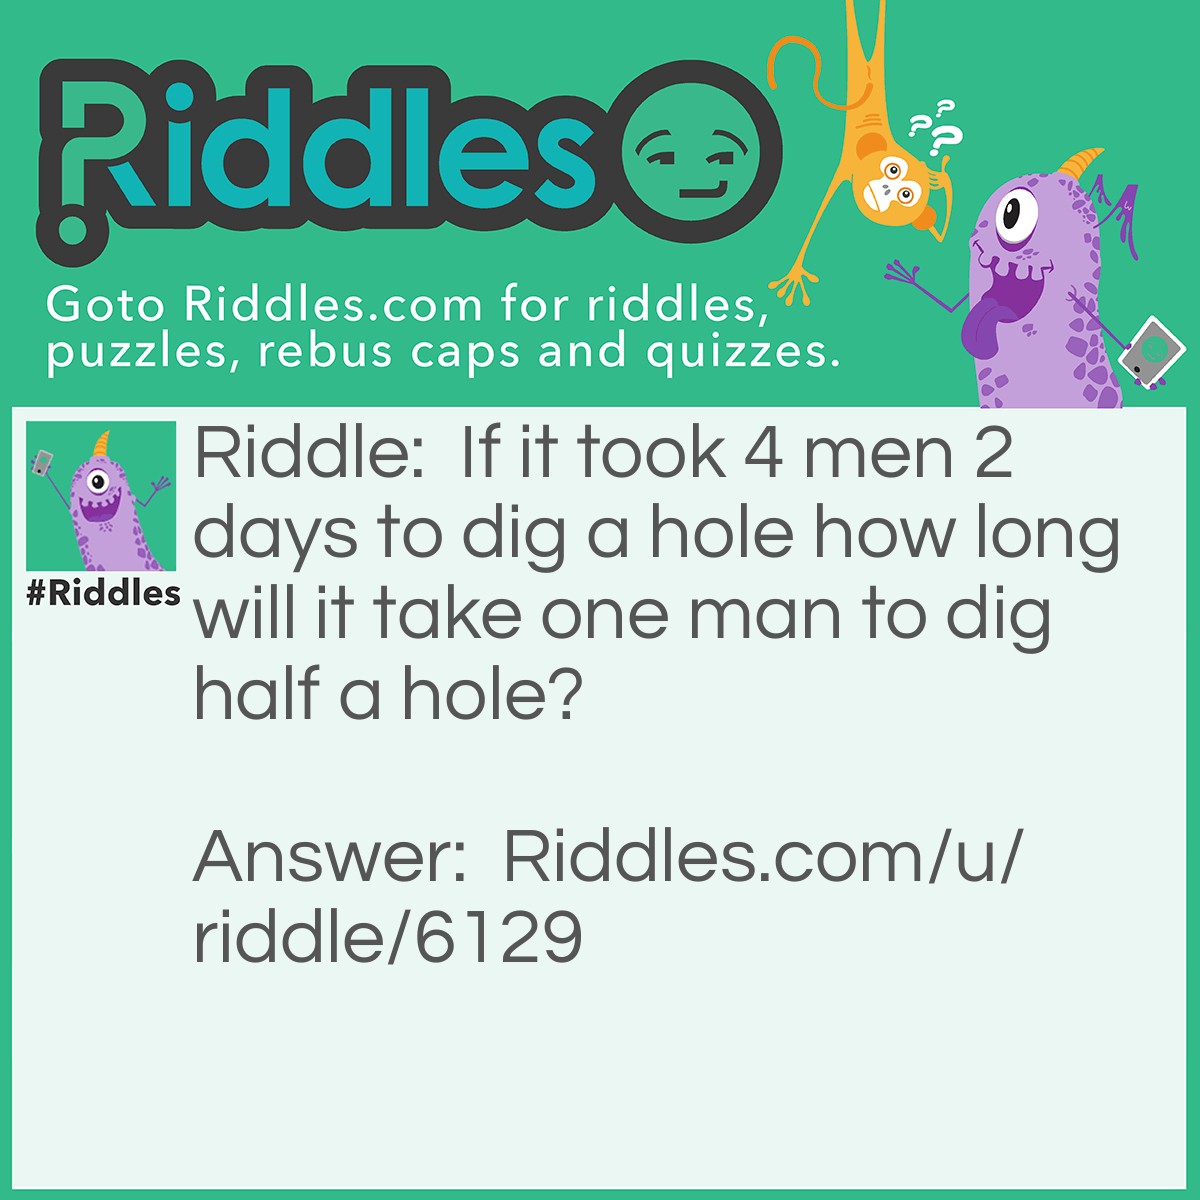 Riddle: If it took 4 men 2 days to dig a hole how long will it take one man to dig half a hole? Answer: About a second. A hole is a hole no matter how deep.